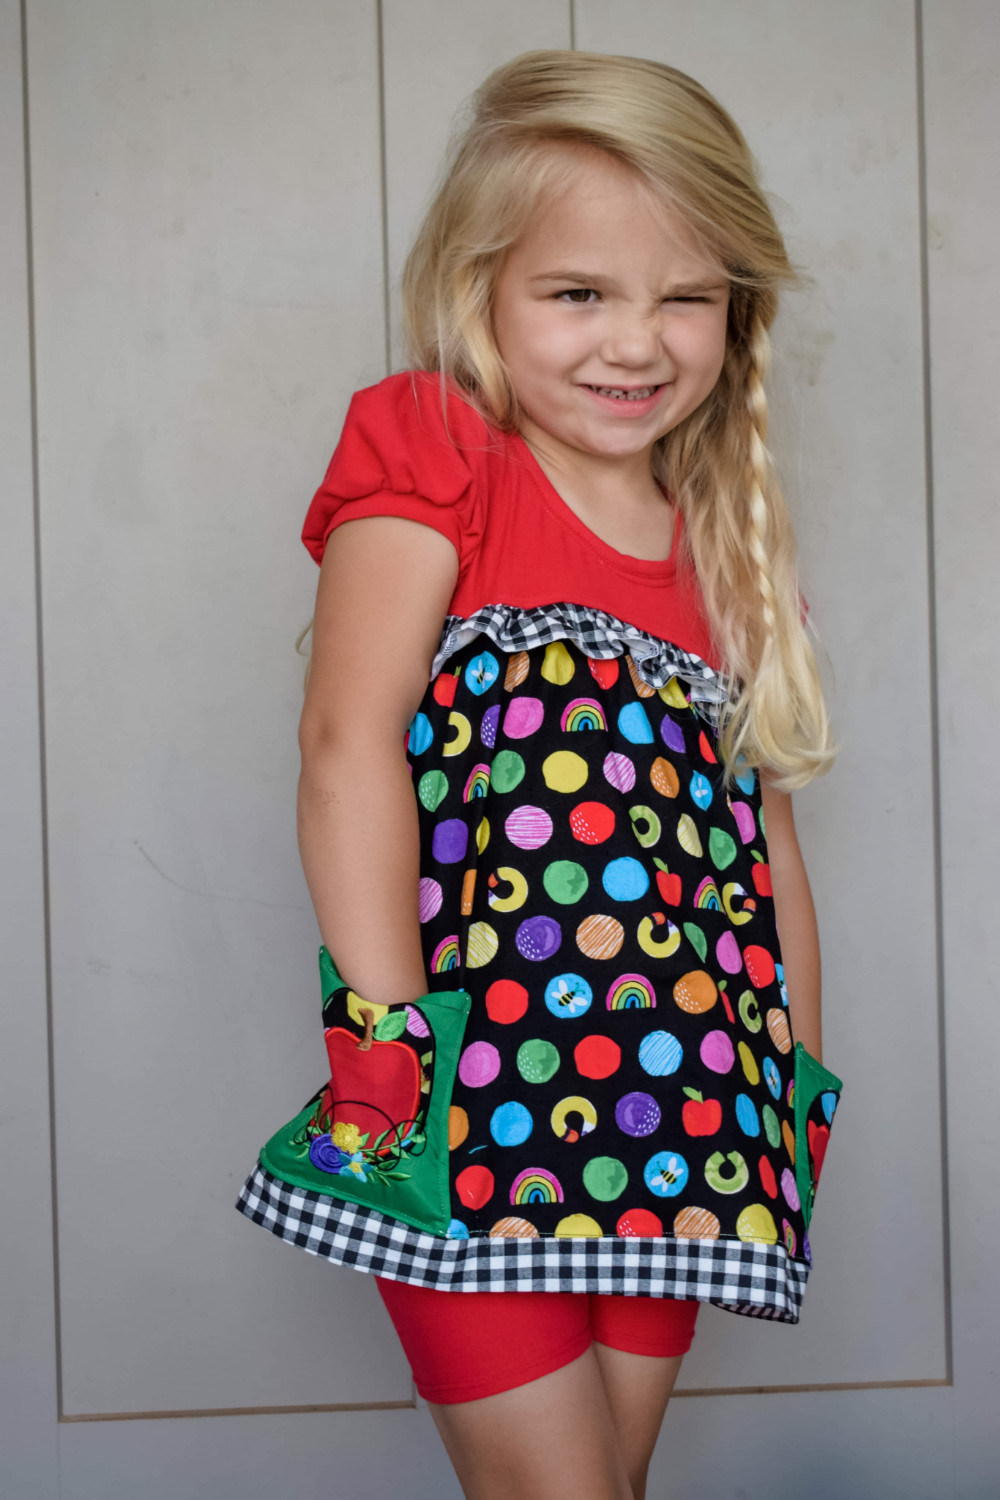 Philly's Flowy Top Sizes 2T to 14 Kids PDF Pattern